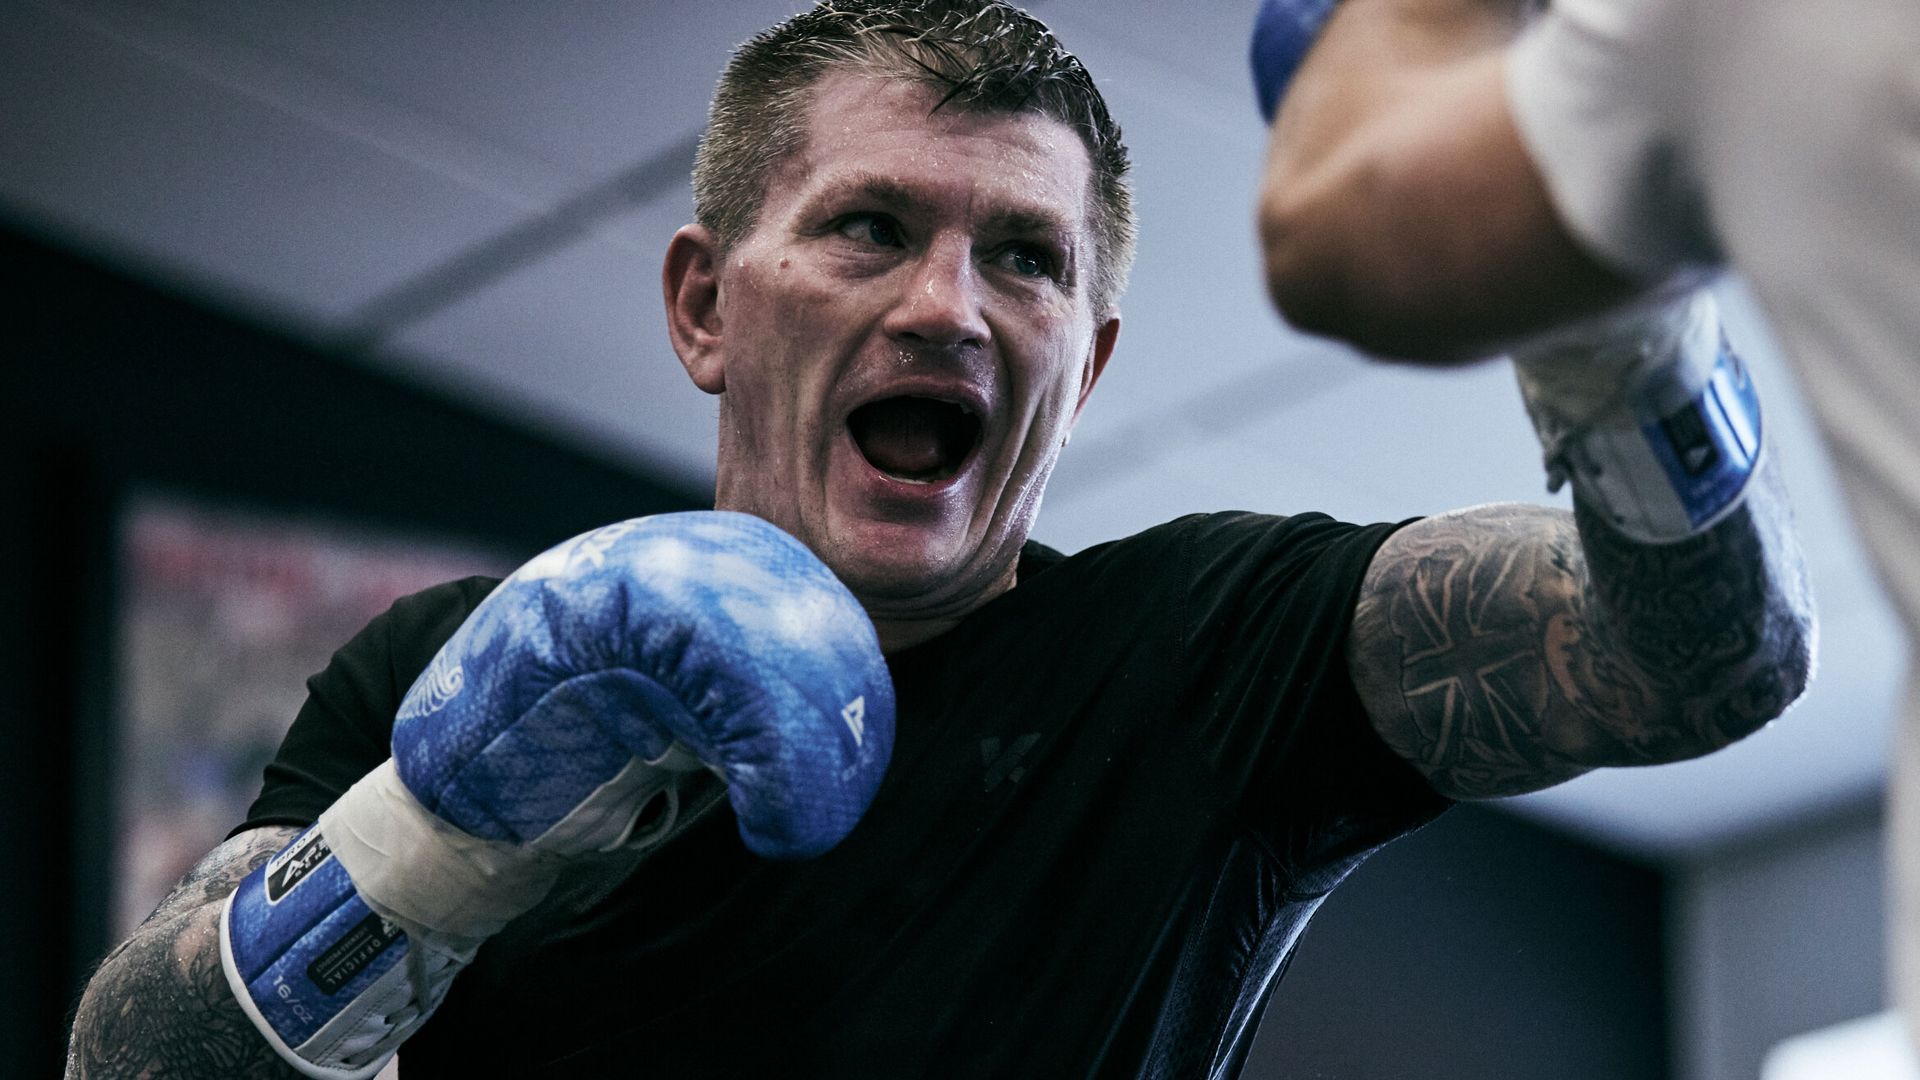 Hatton on his greatest battles: 'No one knew how bad my mental health was'